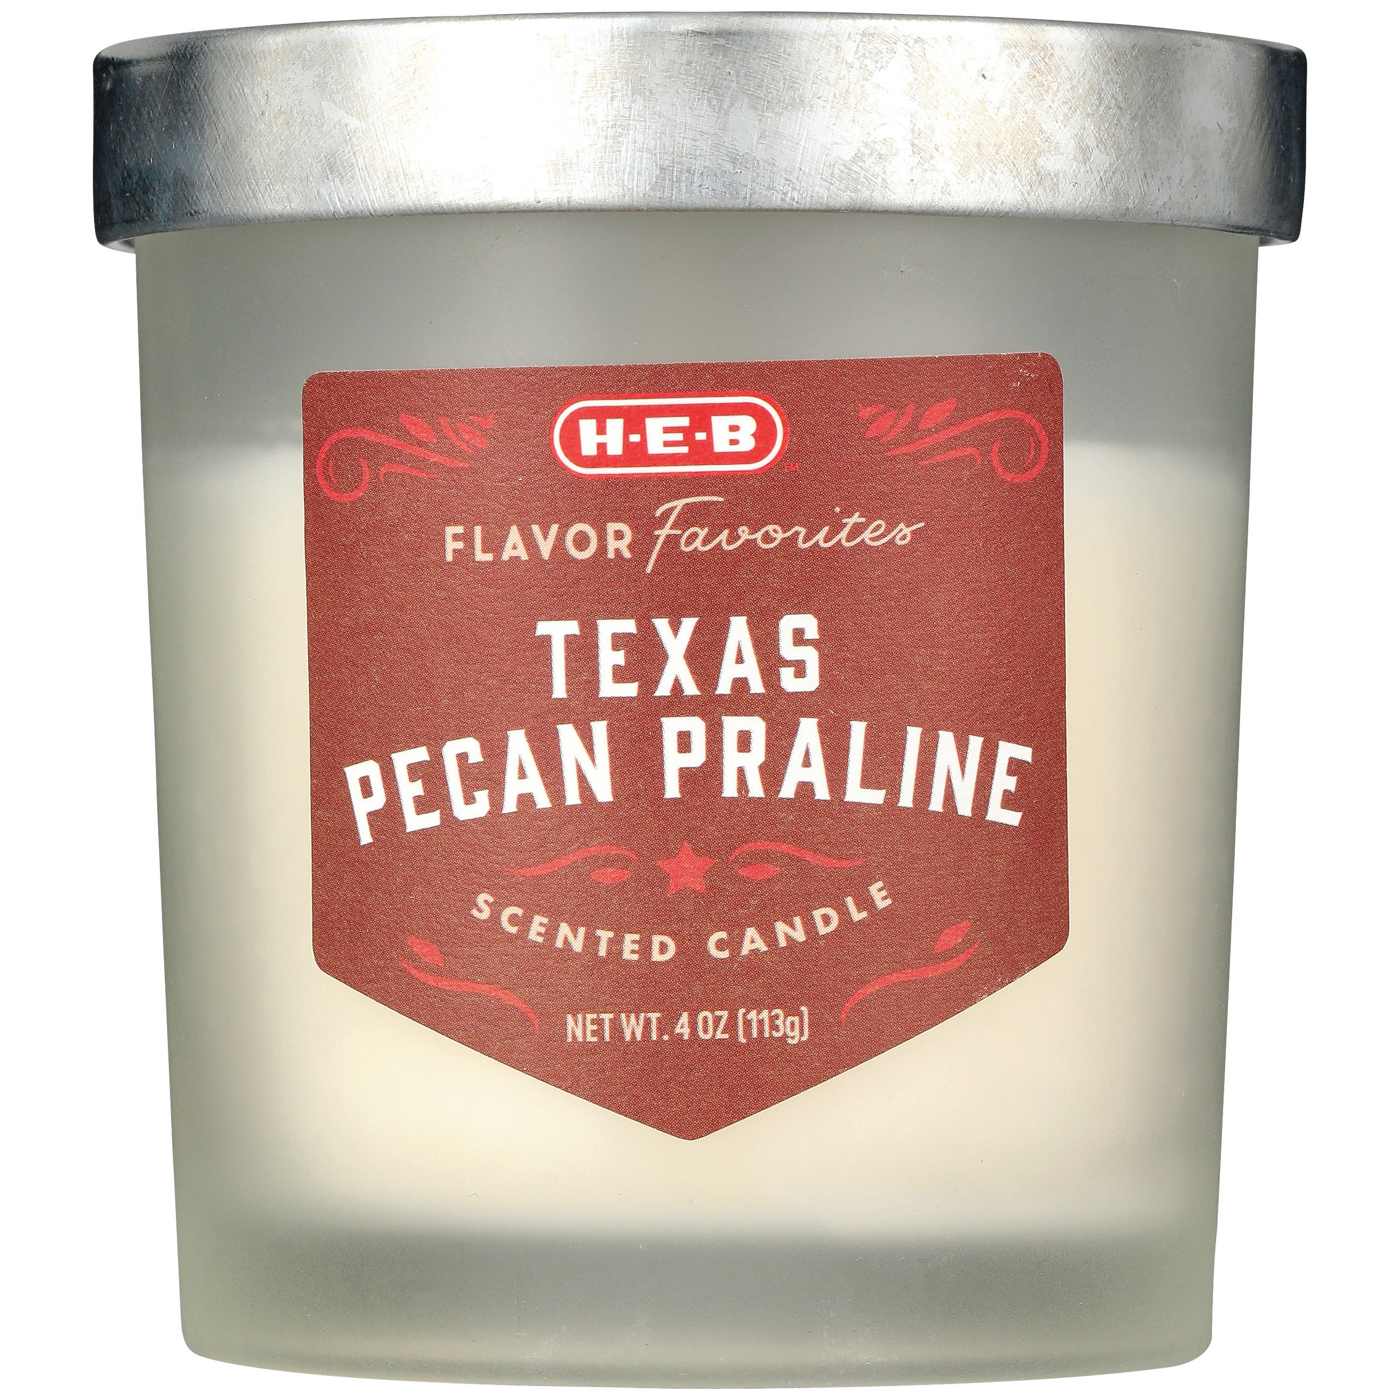 H-E-B Flavor Favorites Texas Pecan Pralines Scented Candle; image 1 of 2